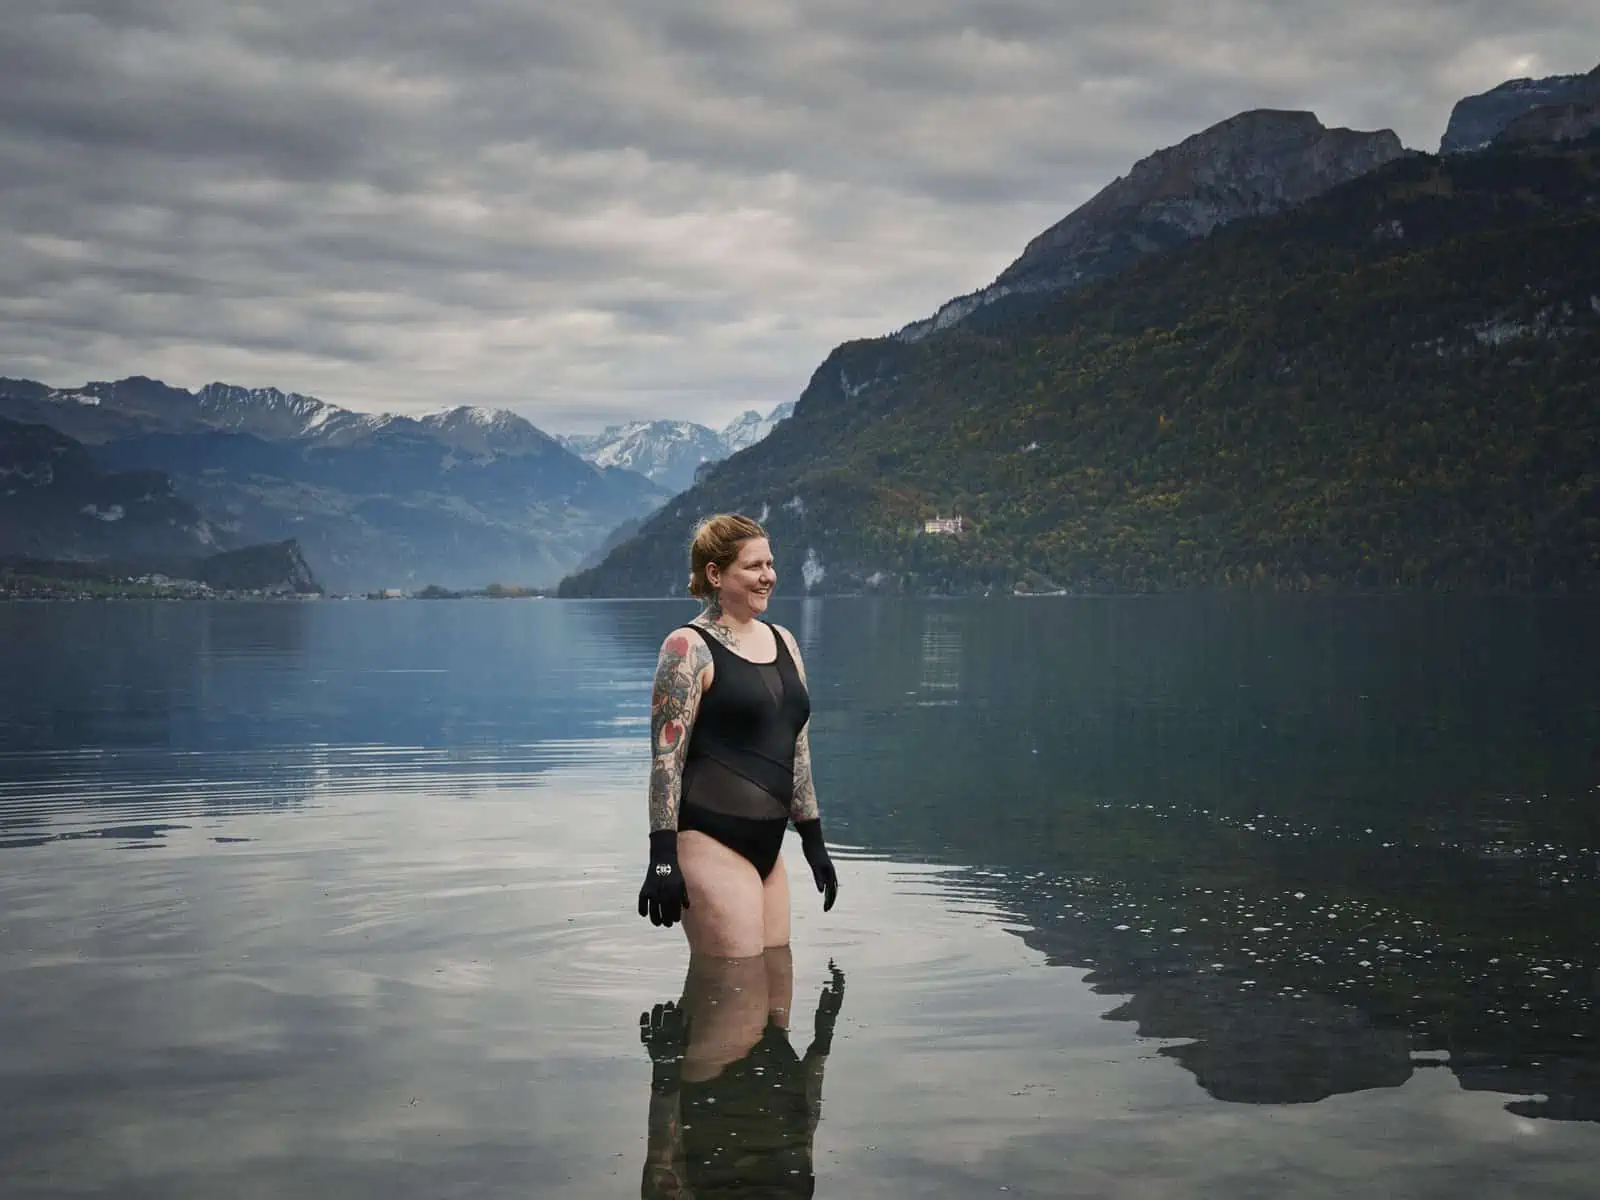 Five Accessible Wild Swimming Locations (with maps) to Try in the Bernese Alps, Switzerland - Fm Dsc F Rgb